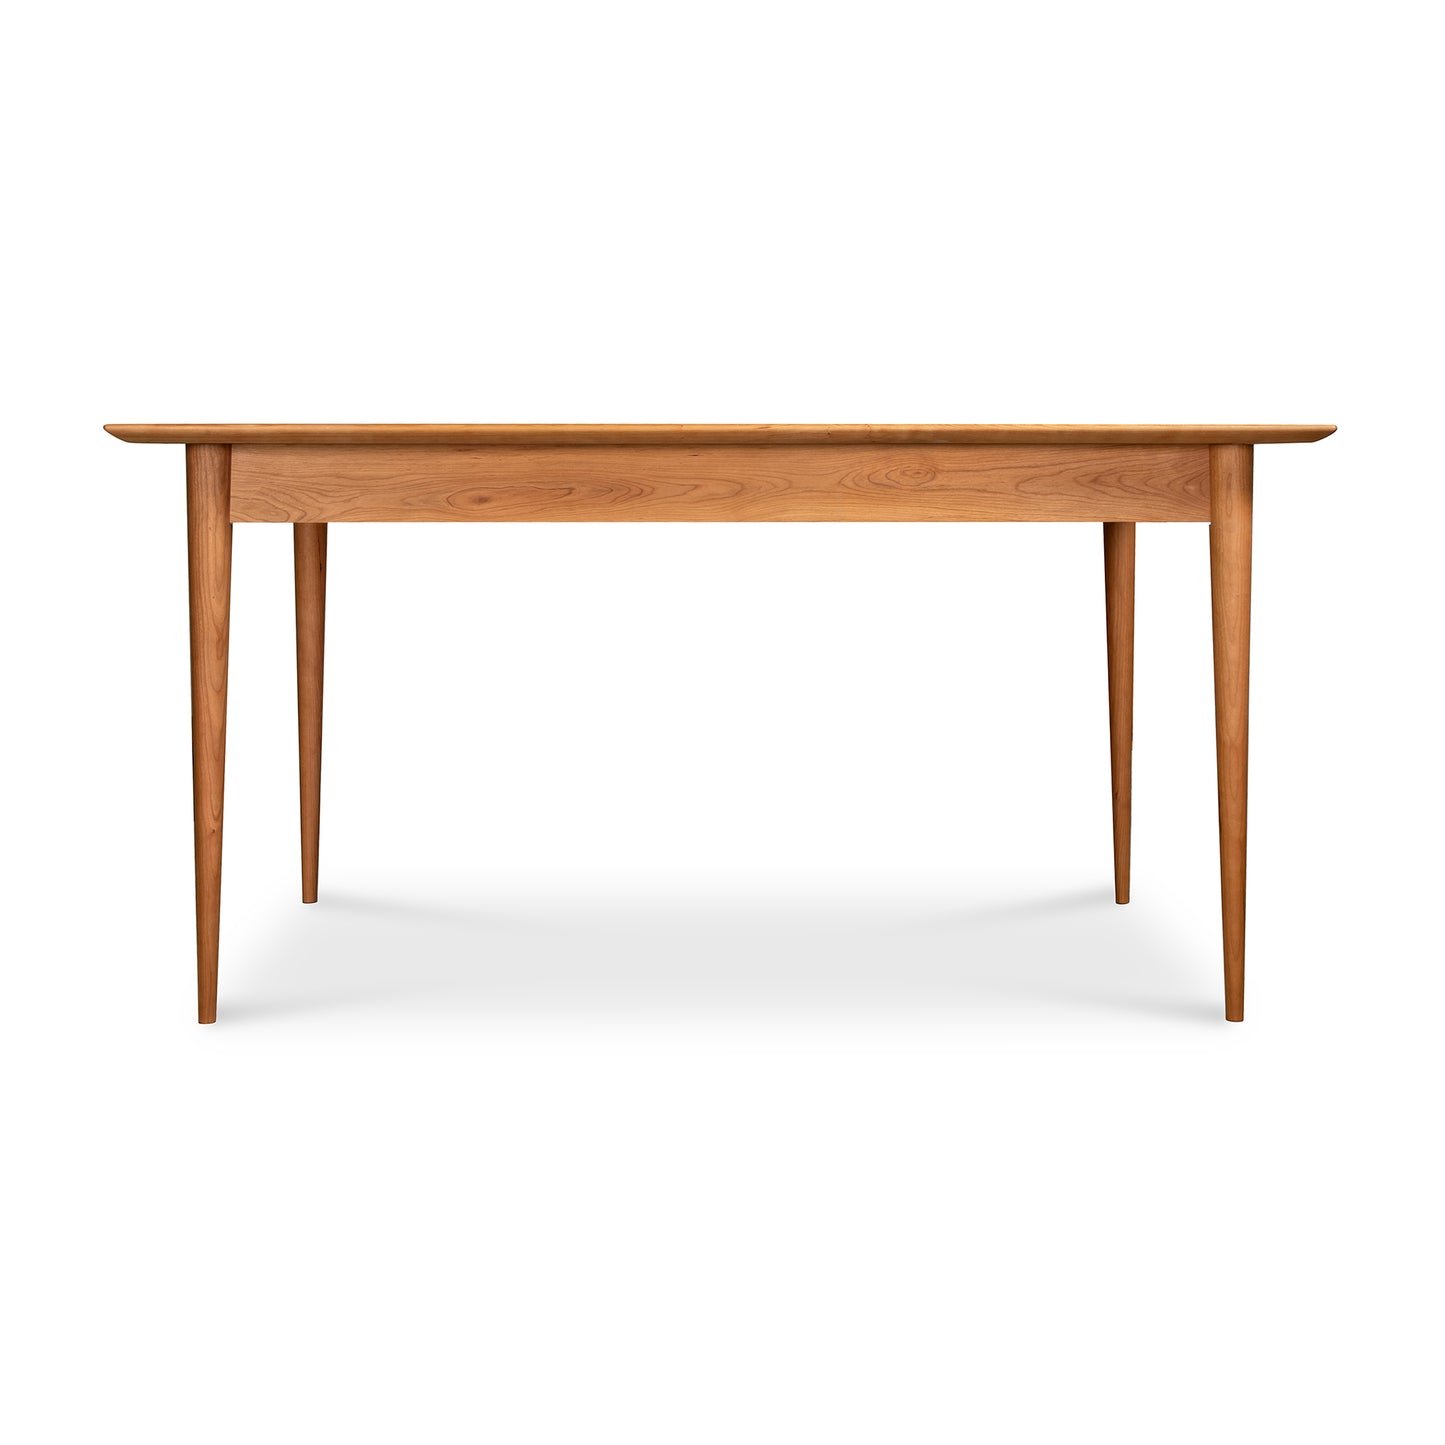 A Burke Modern Dining Table made of sustainable solid wood, with two legs, displayed against a white background.